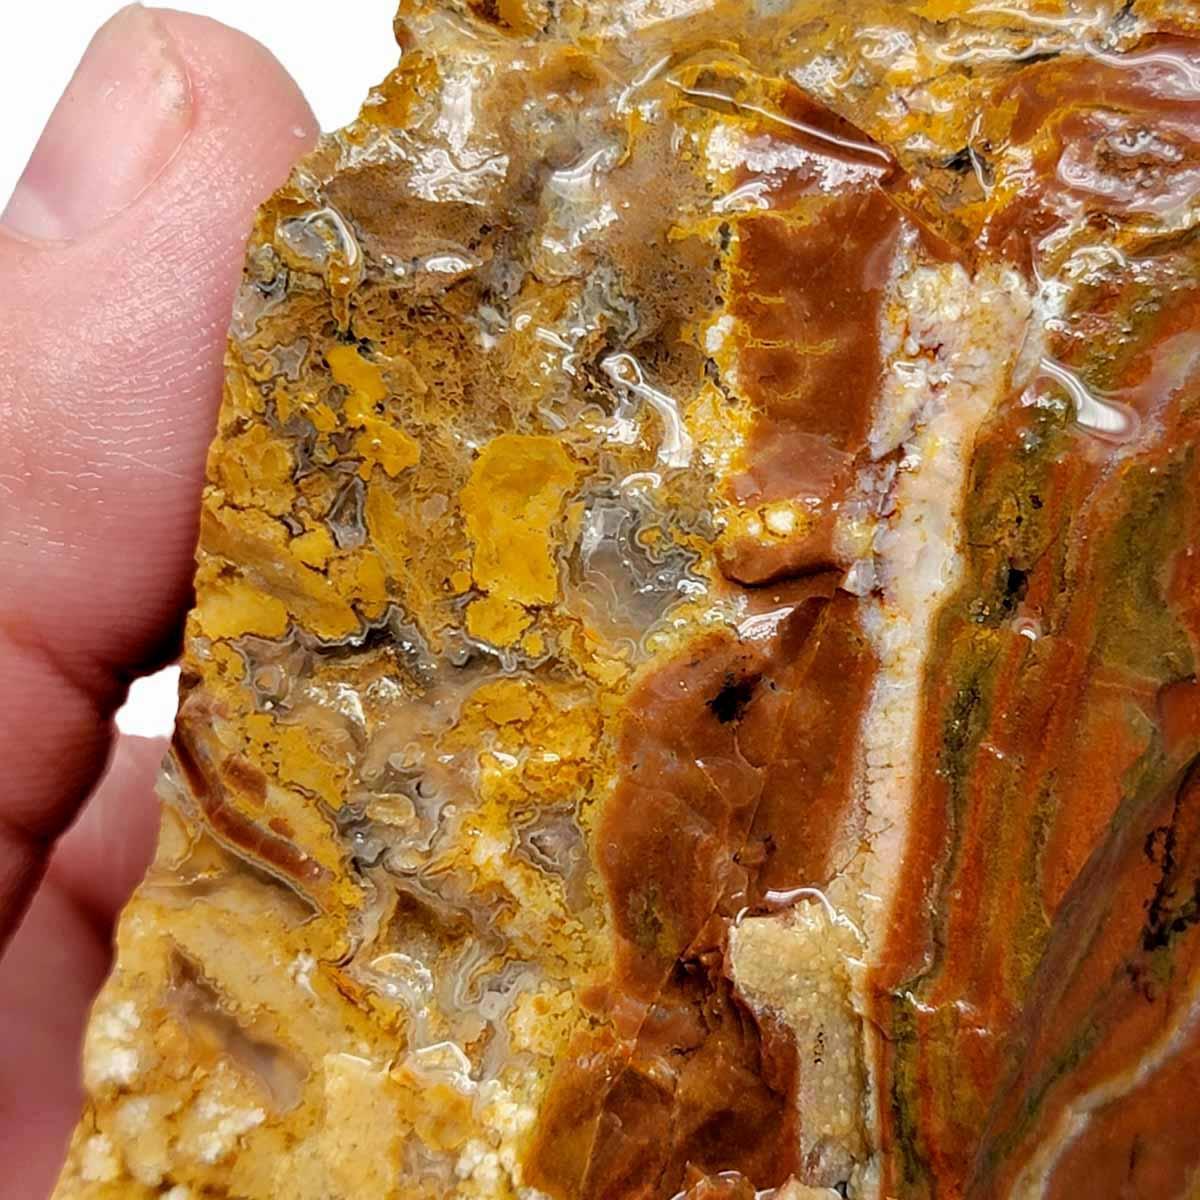 Eagle Rock Plume Agate Rough Chunk! - LapidaryCentral